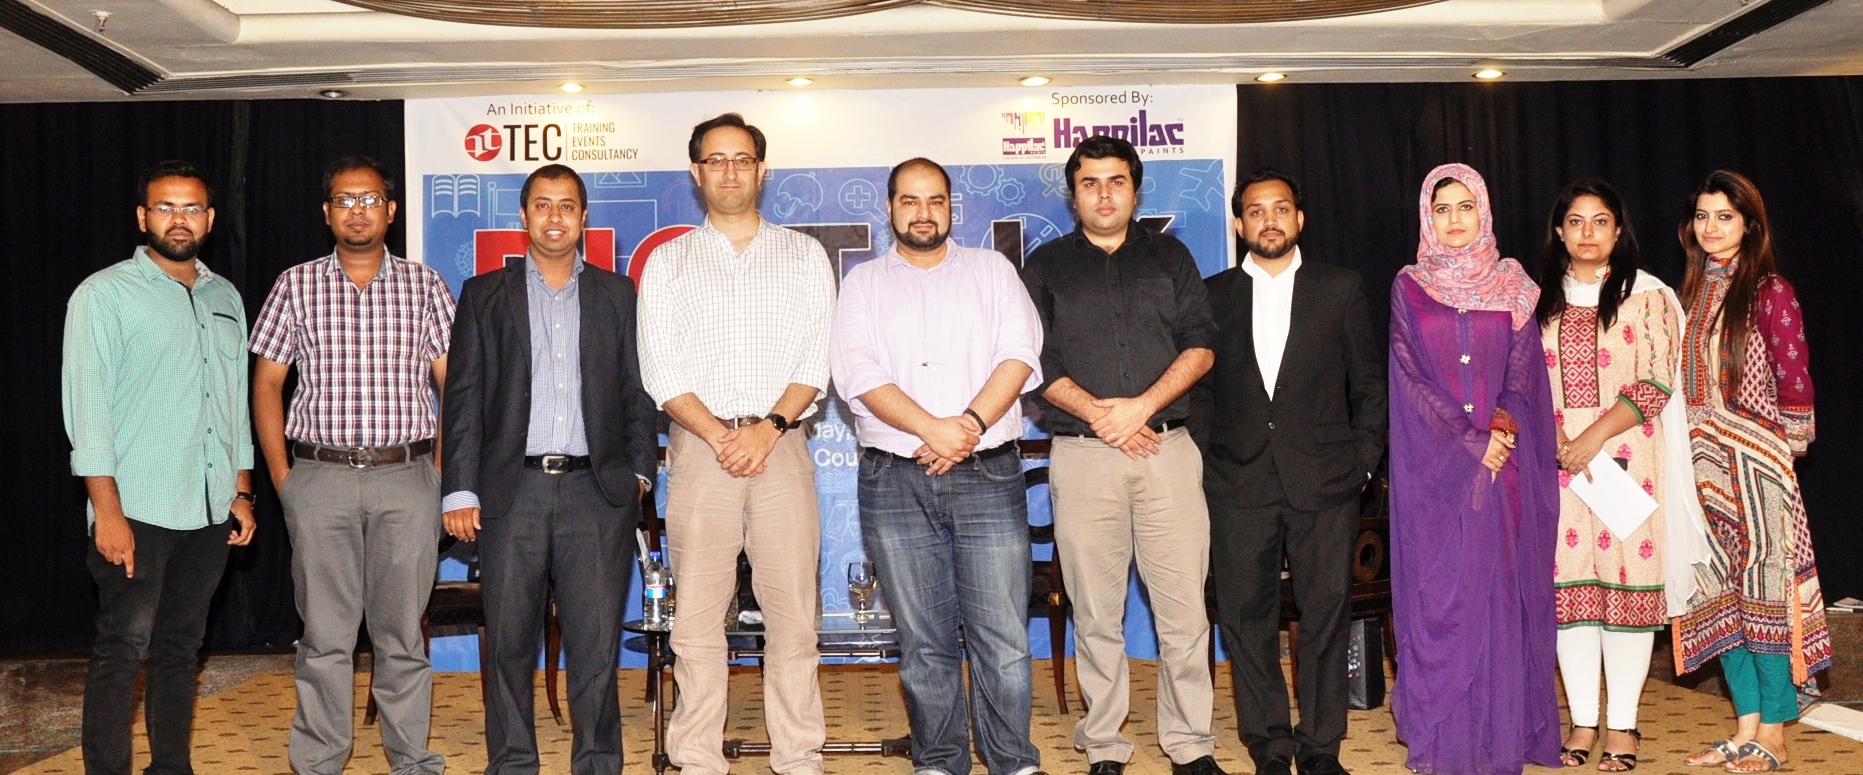 DIGITALK Holds Session on Future of Digital Payments